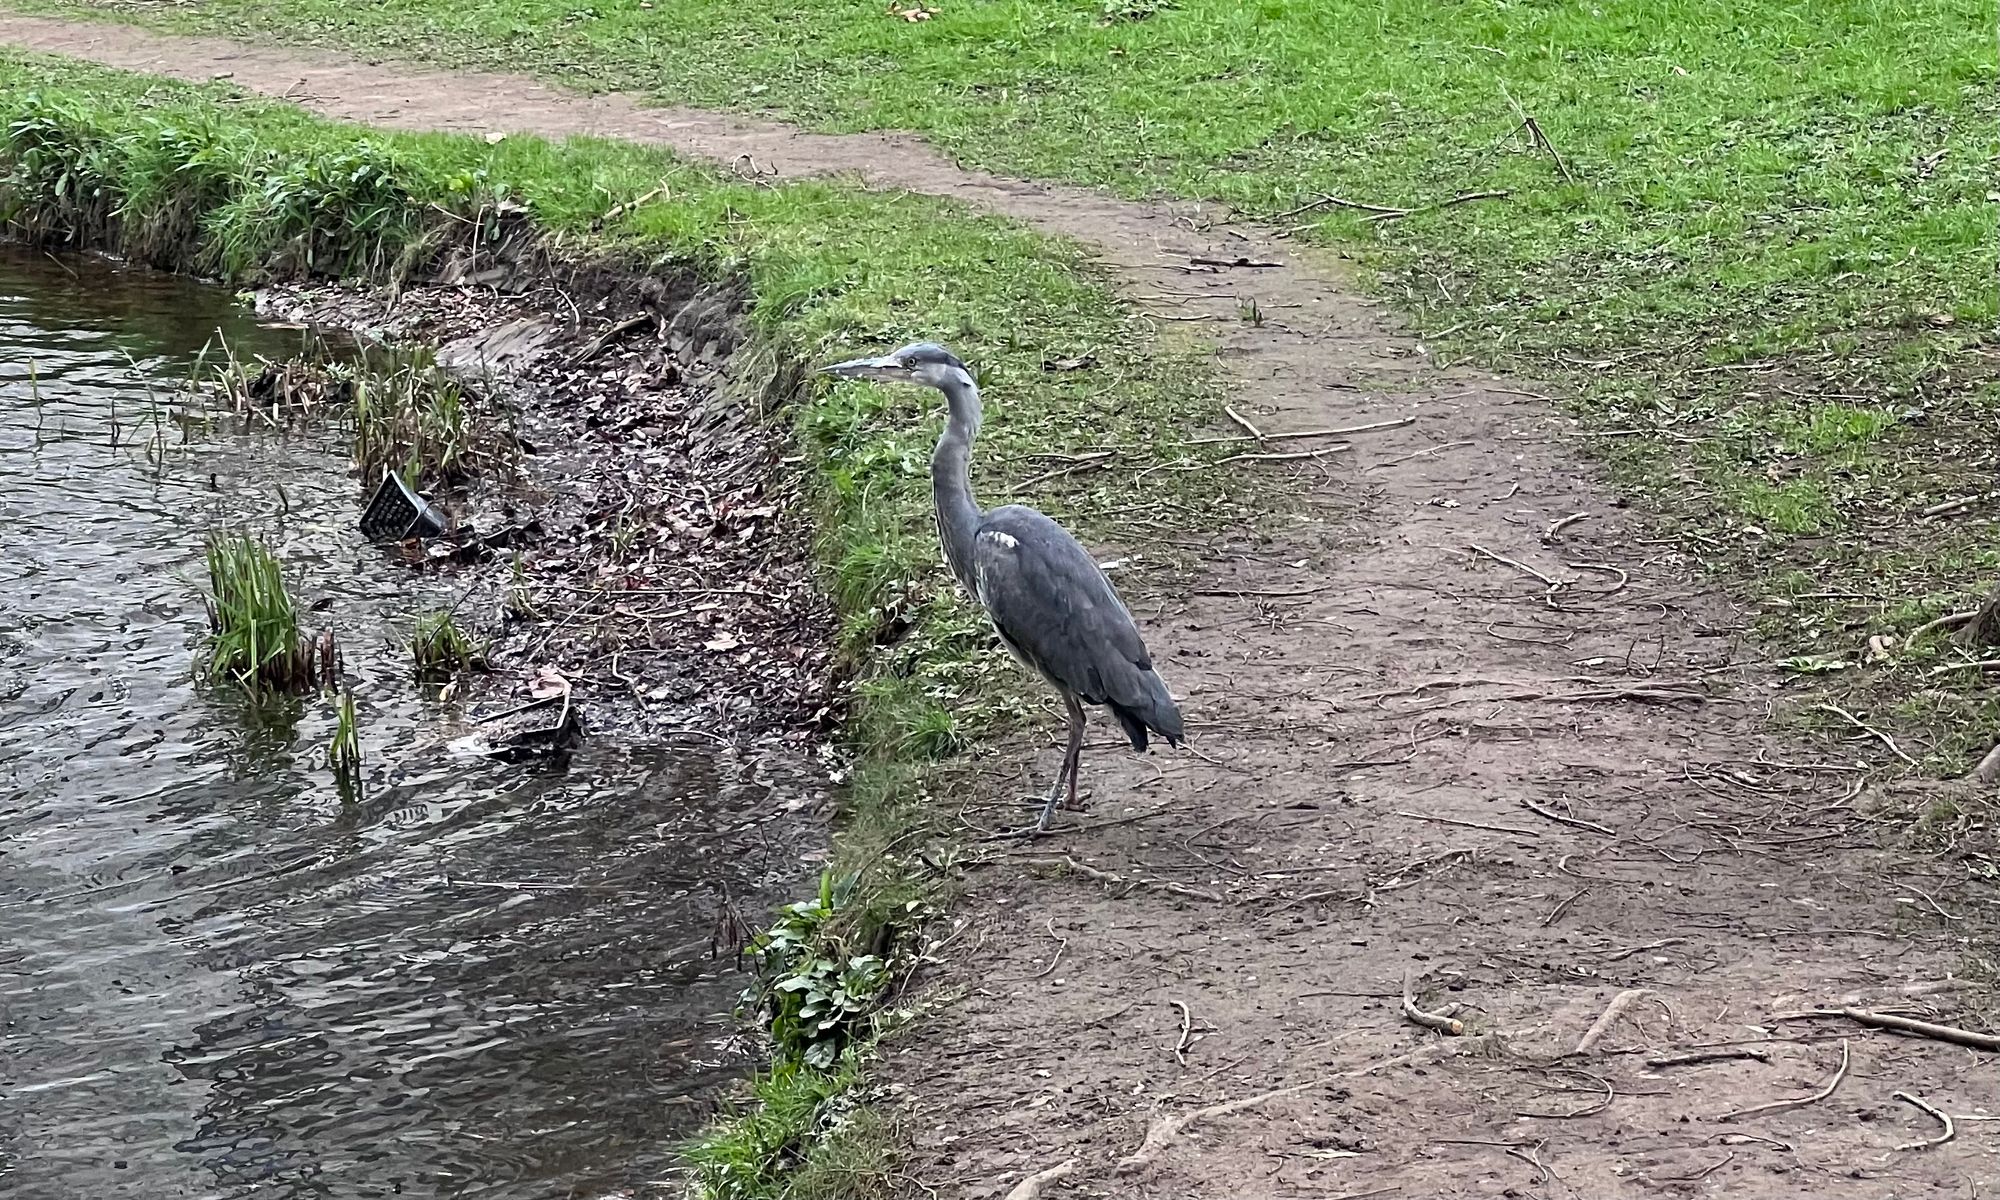 A grey heron stands on the edge of a pond.